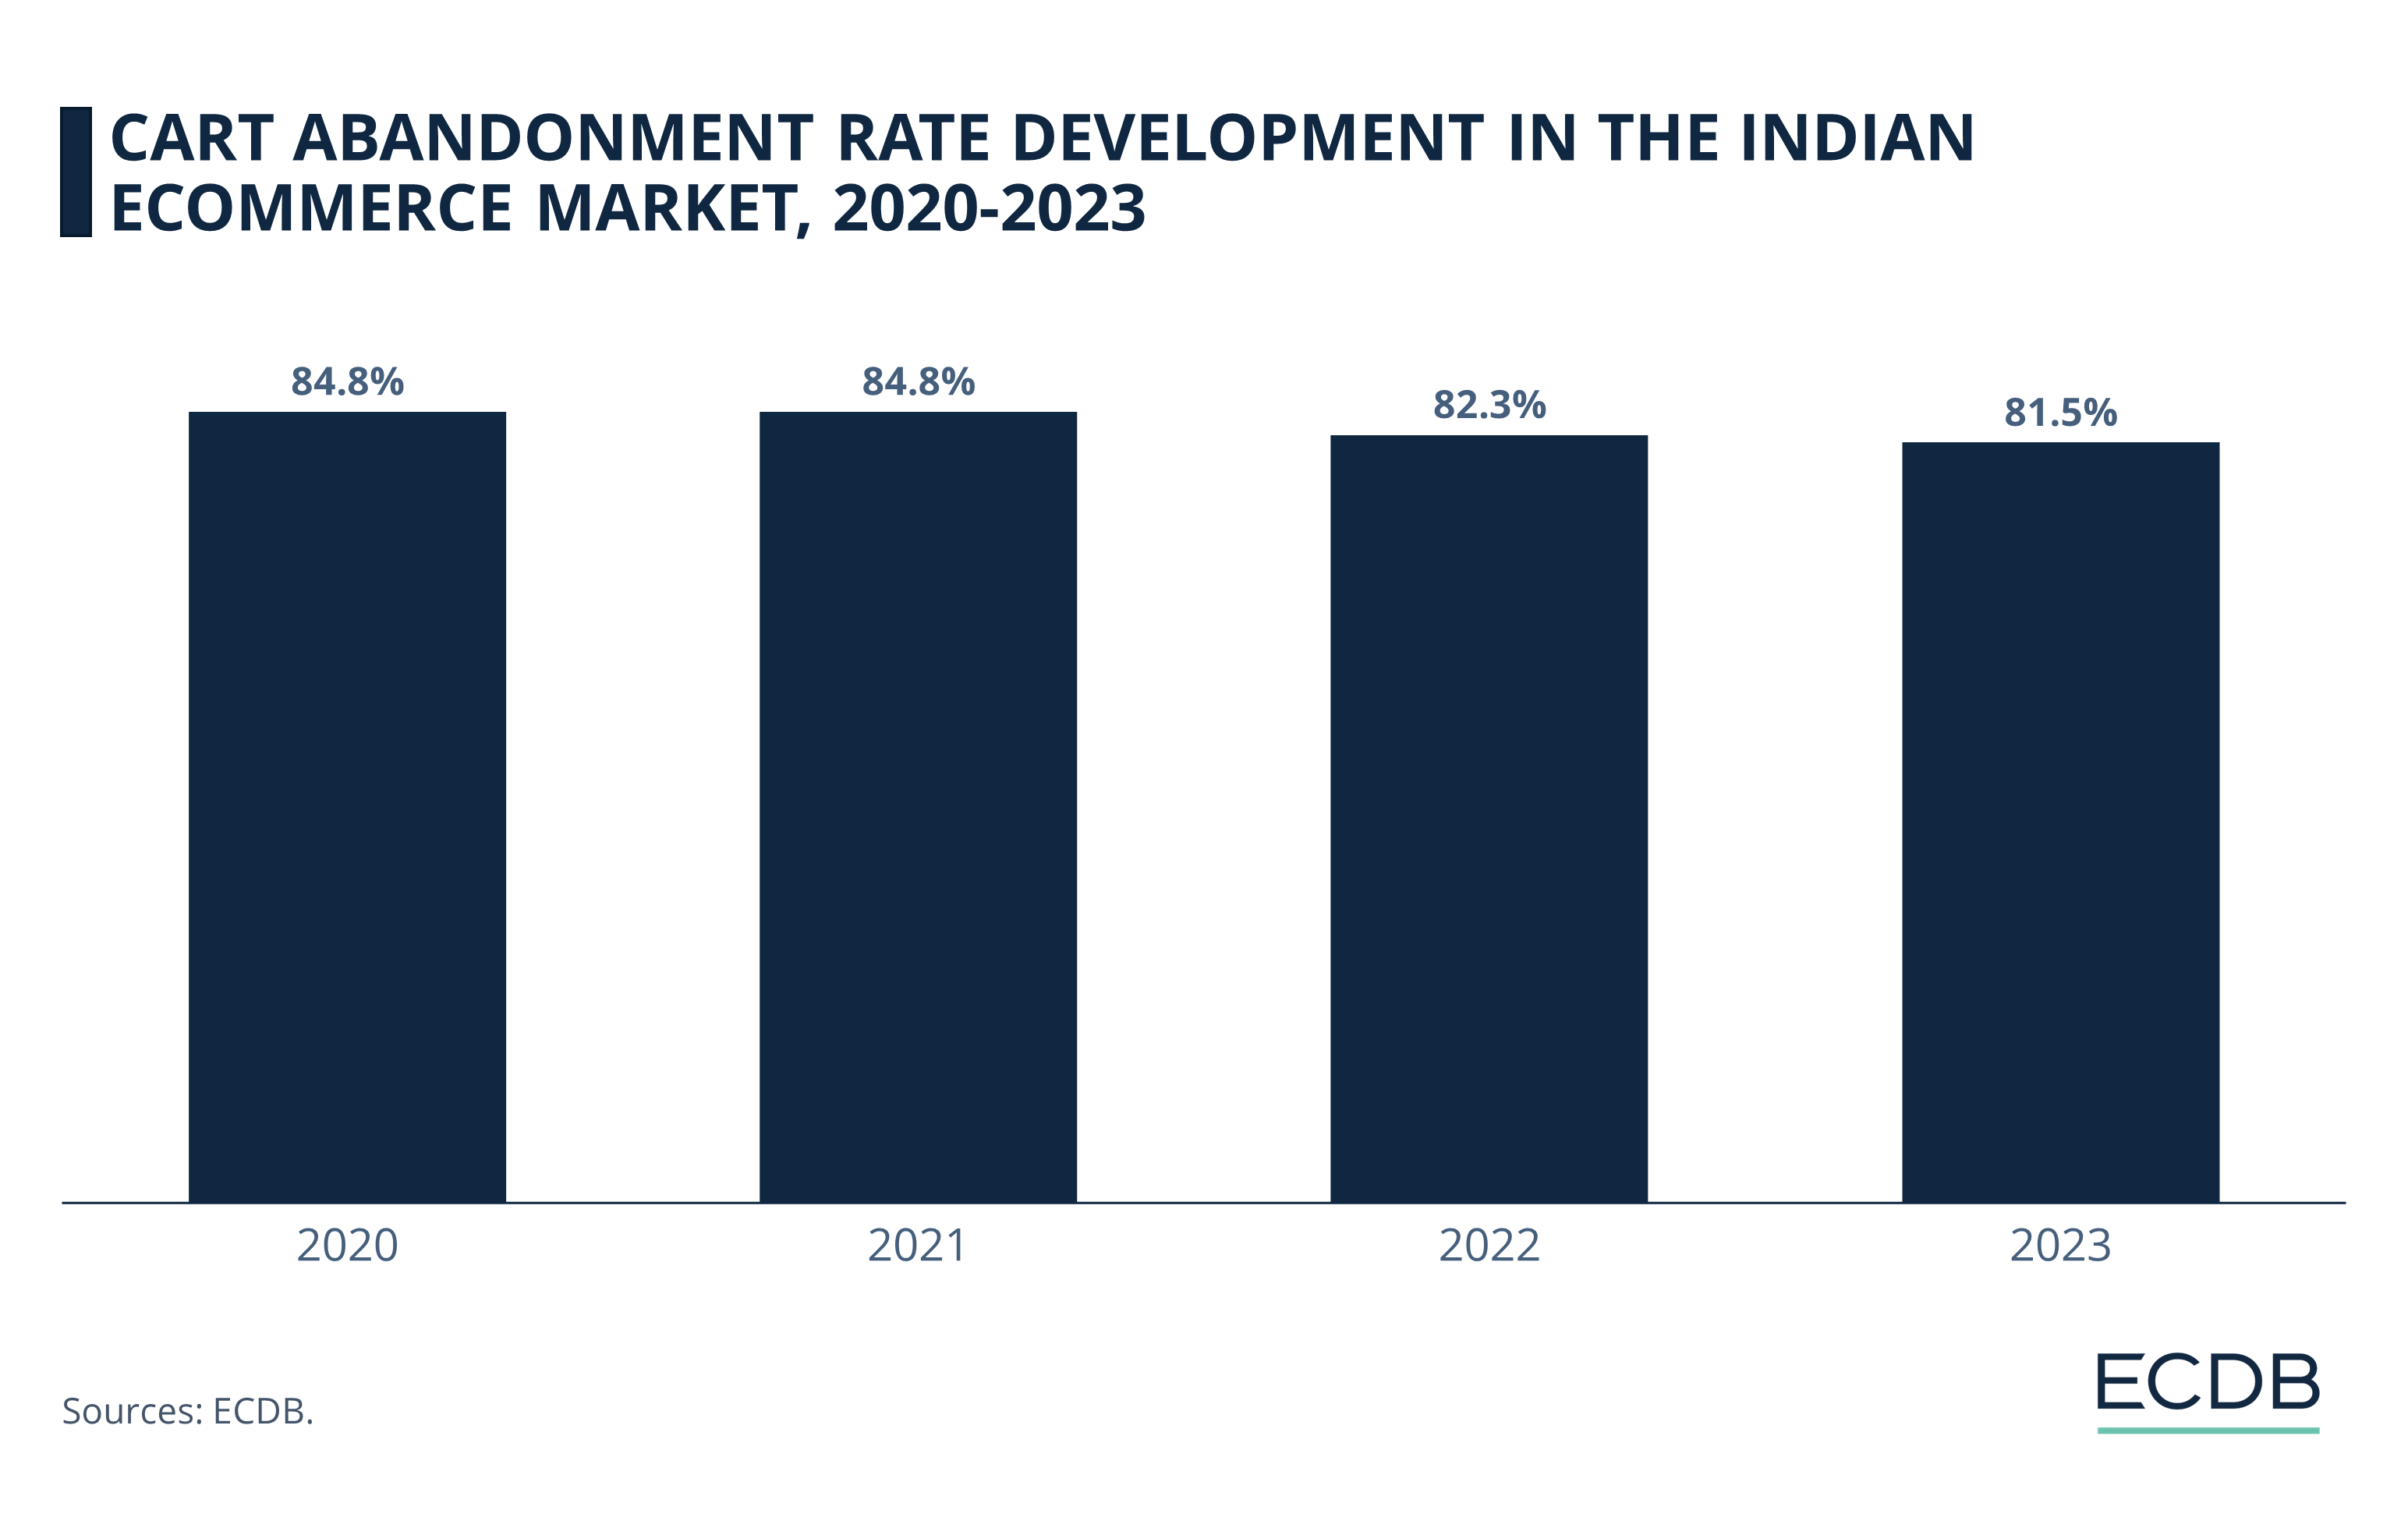 Cart Abandonment Rate Development in the Indian eCommerce Market, 2020-2023